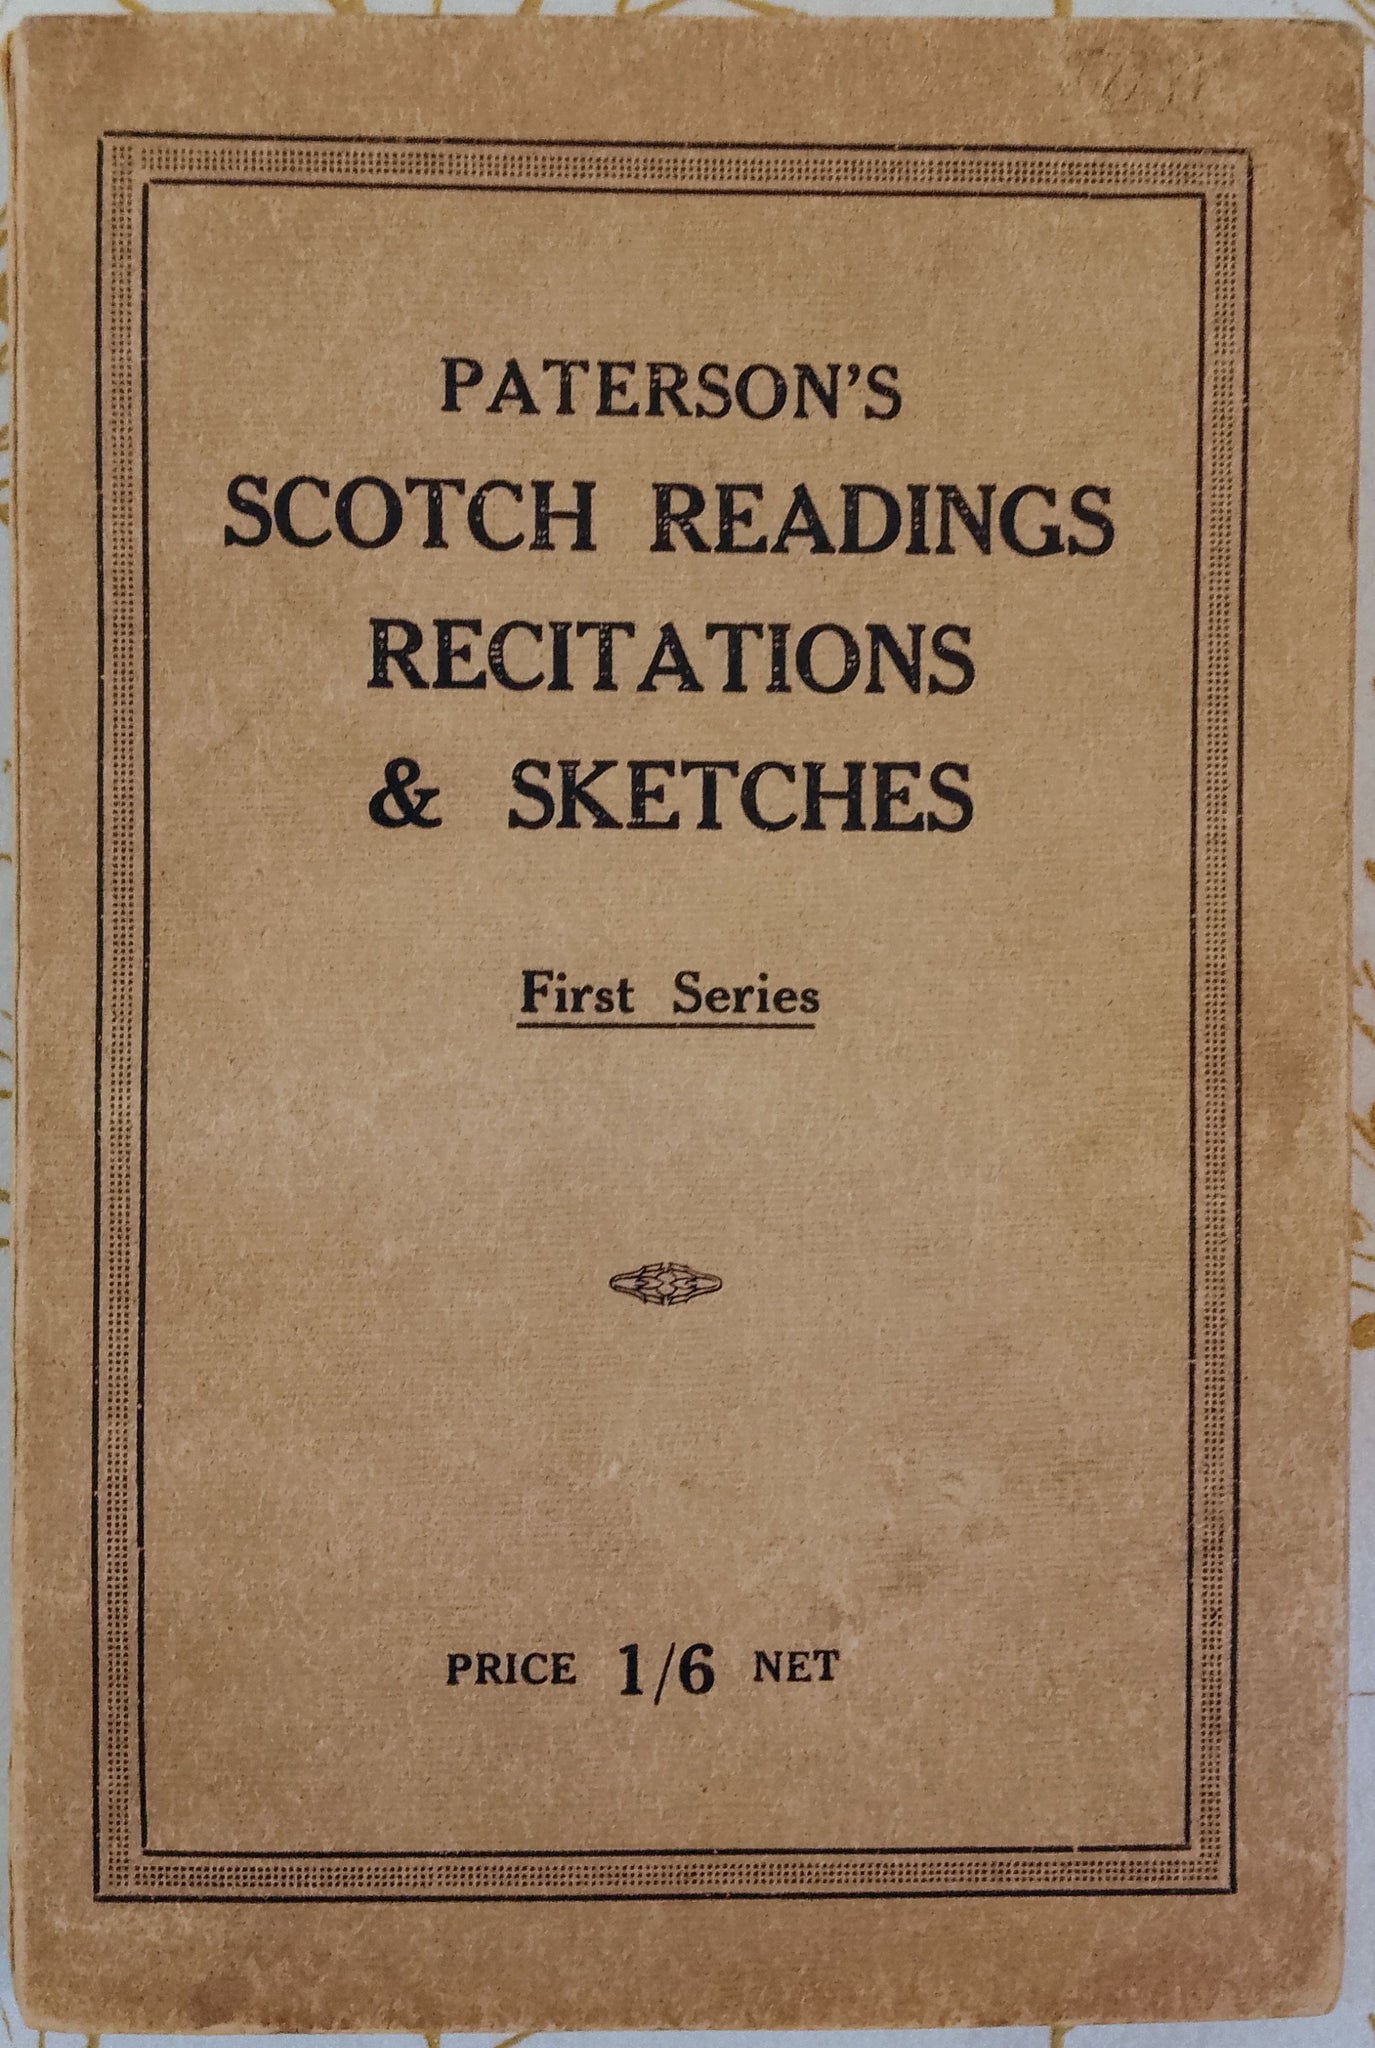 Paterson's Scotch Readings, Recitations amd Sketches: First Series. by T.W. Paterson